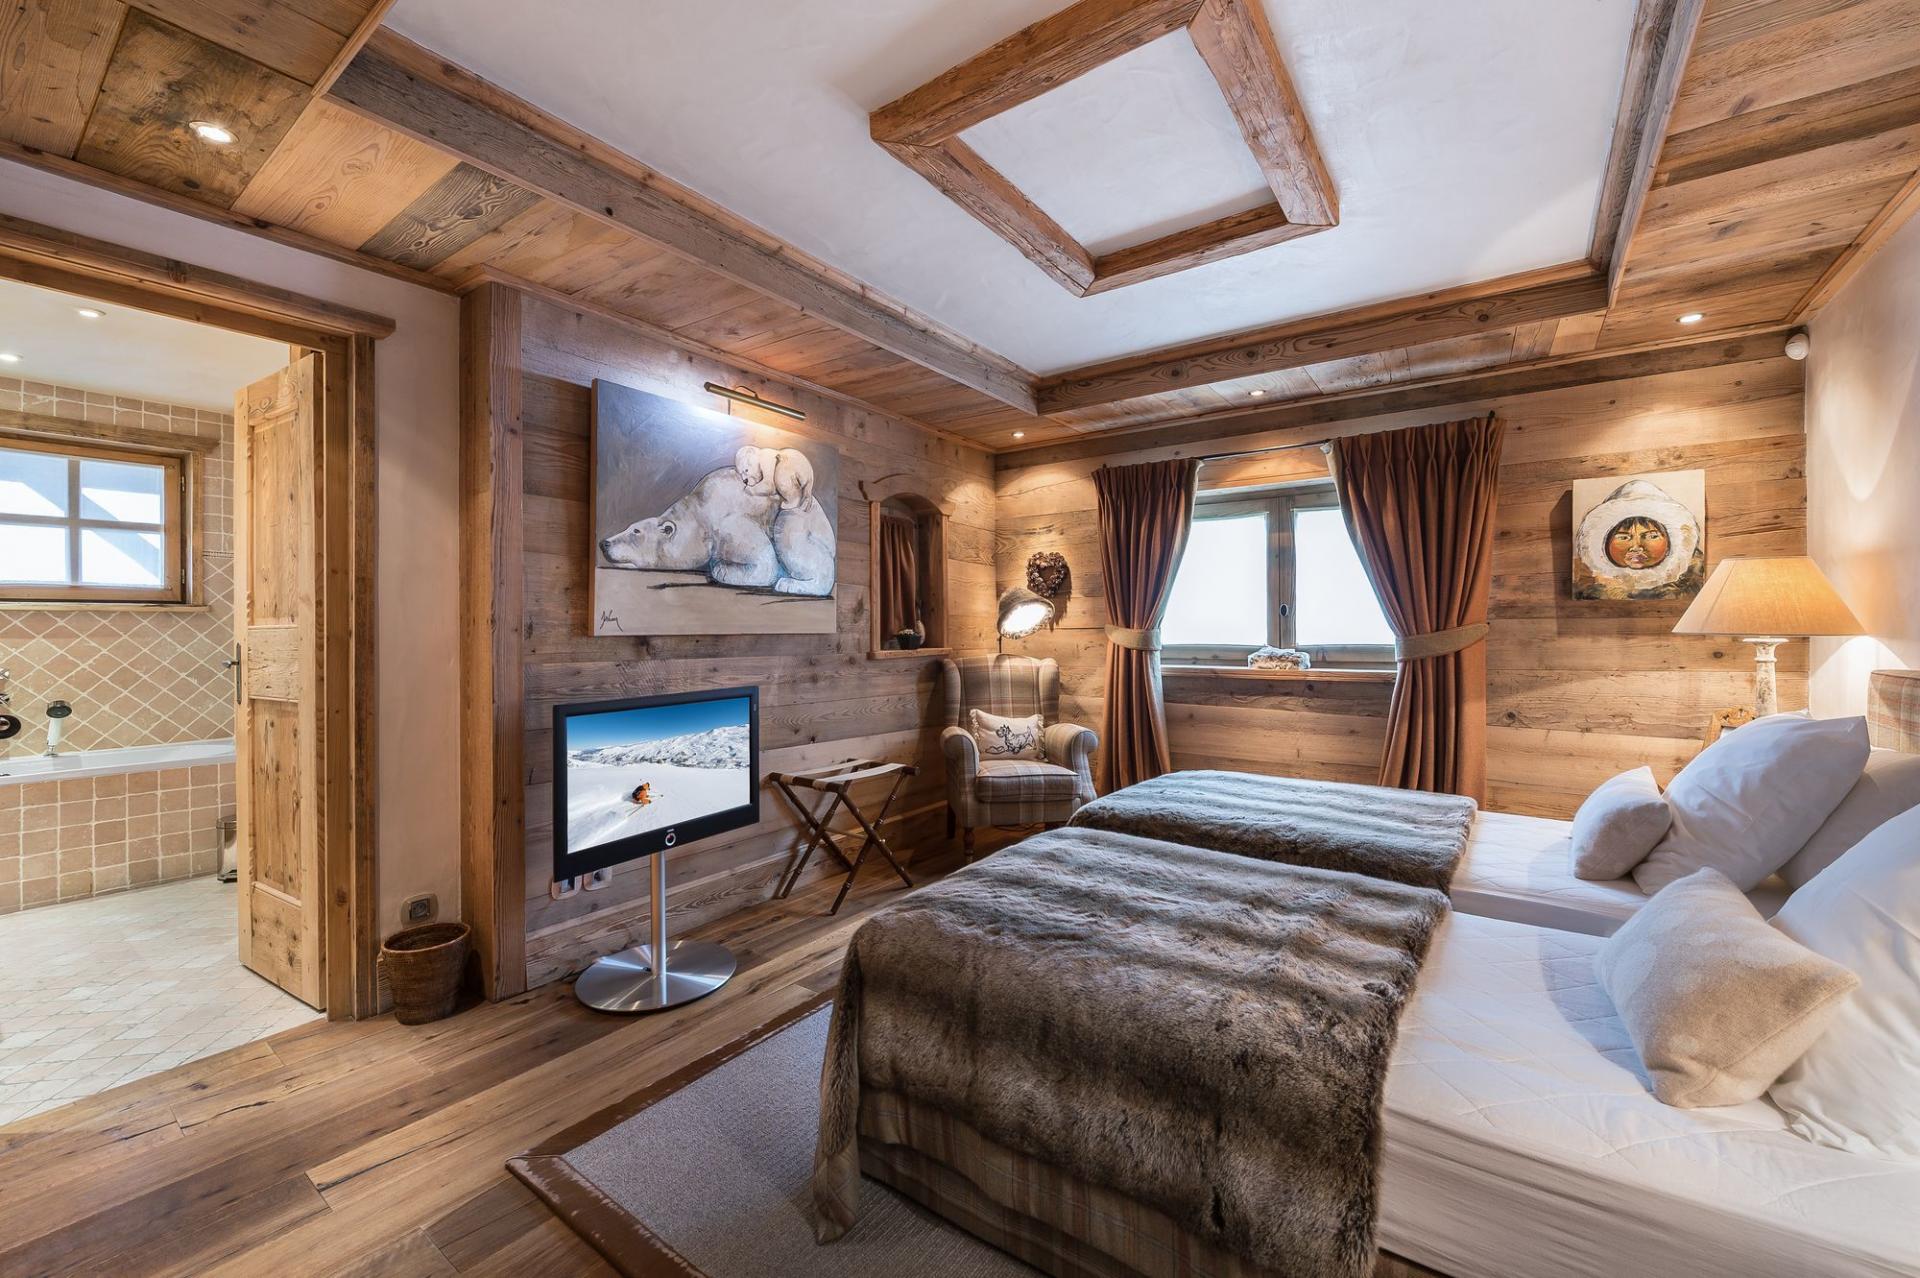 ANOTHER BEDROOM IN CHALET BELLECOTE